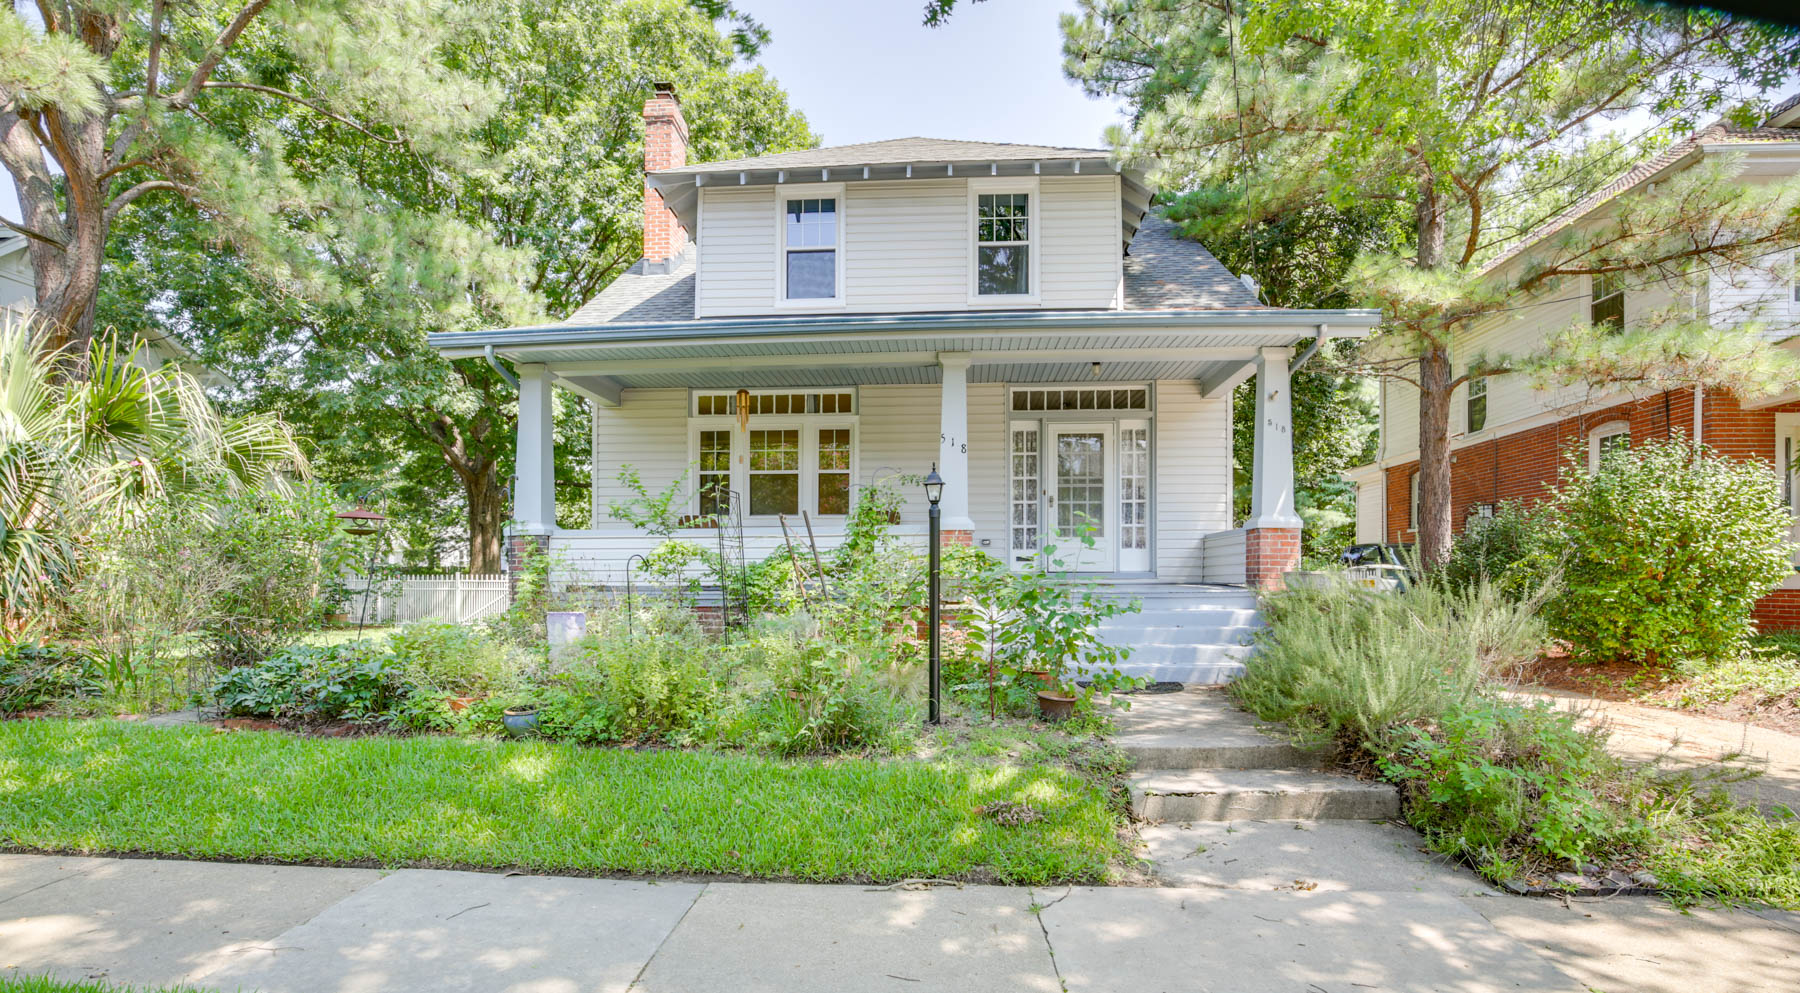 518 New Jersey Avenue: Sold!